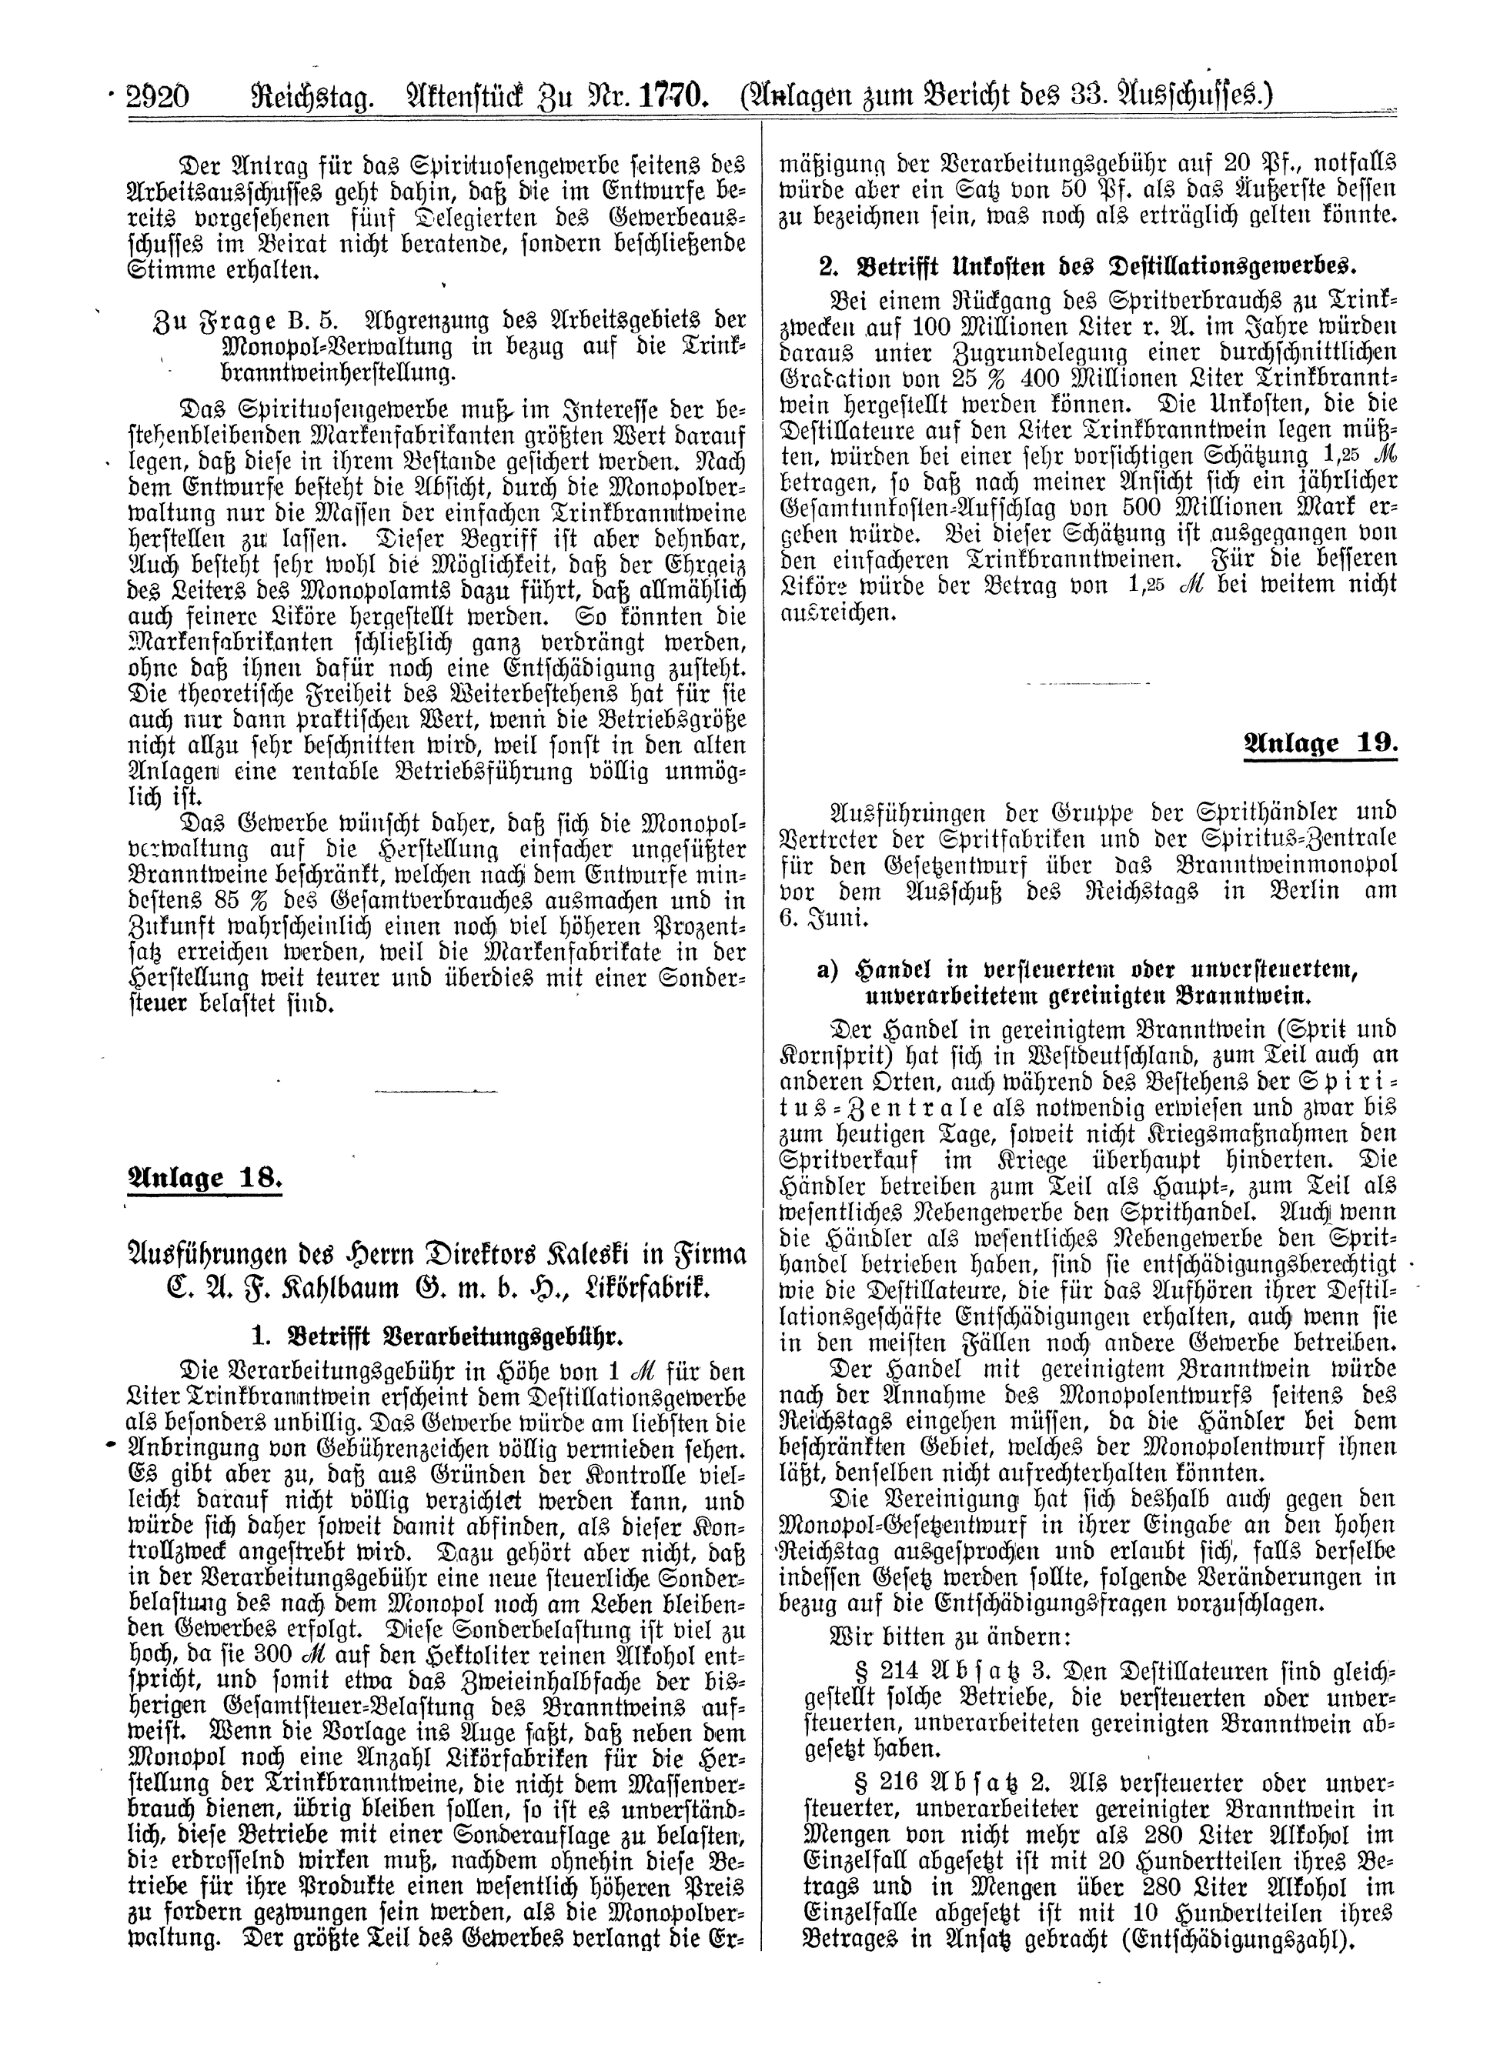 Scan of page 2920